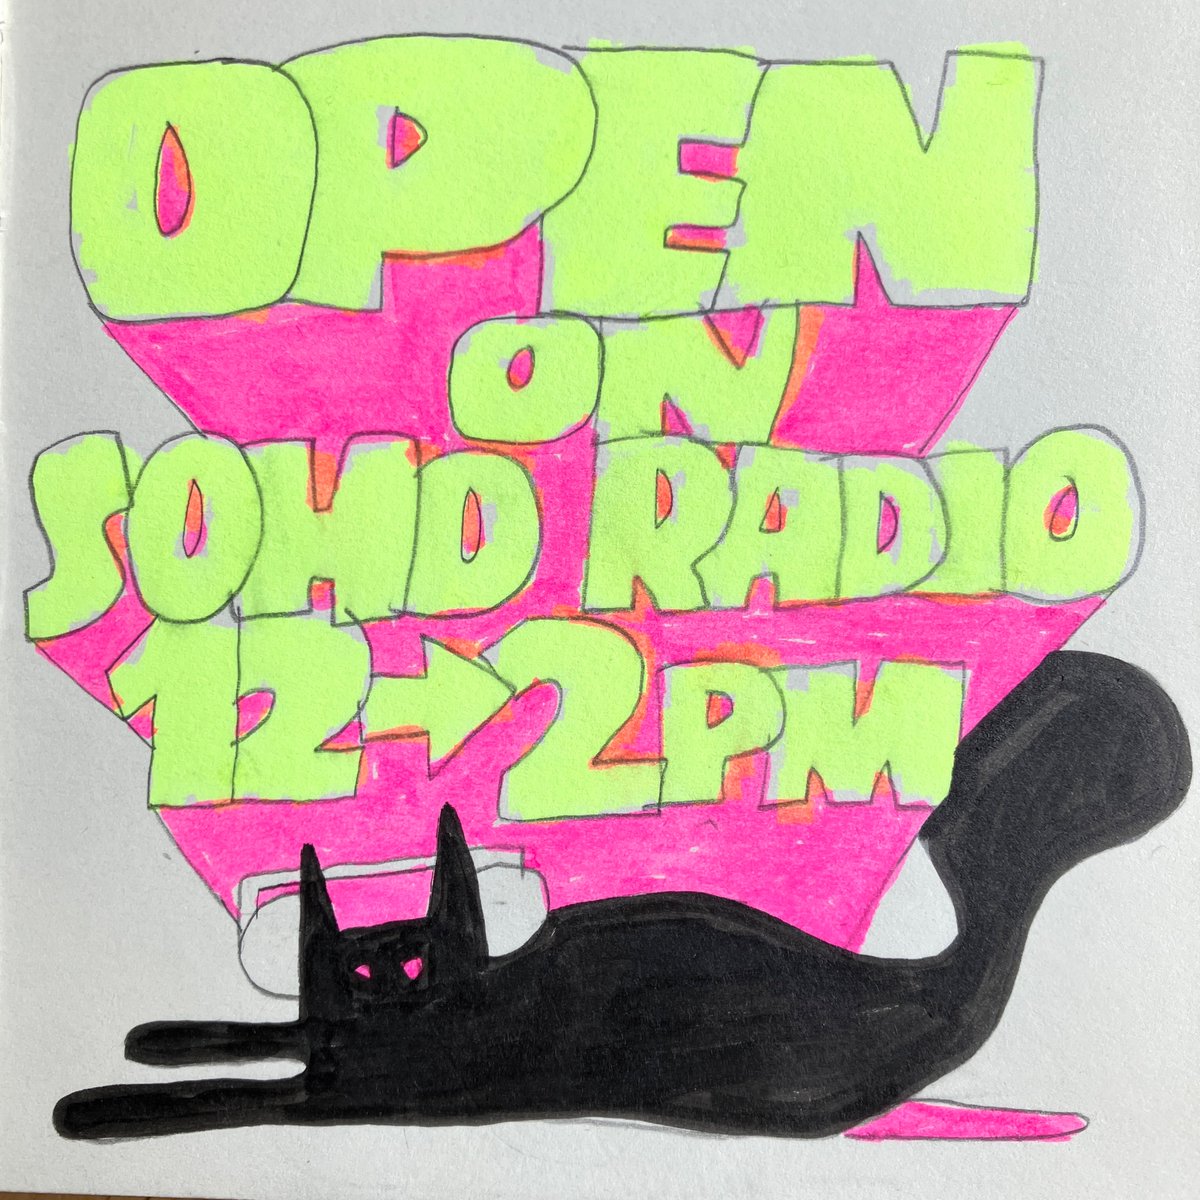 Me & Ian are back on @sohoradio today from 12 to 2pm with OPEN. sohoradiolondon.com